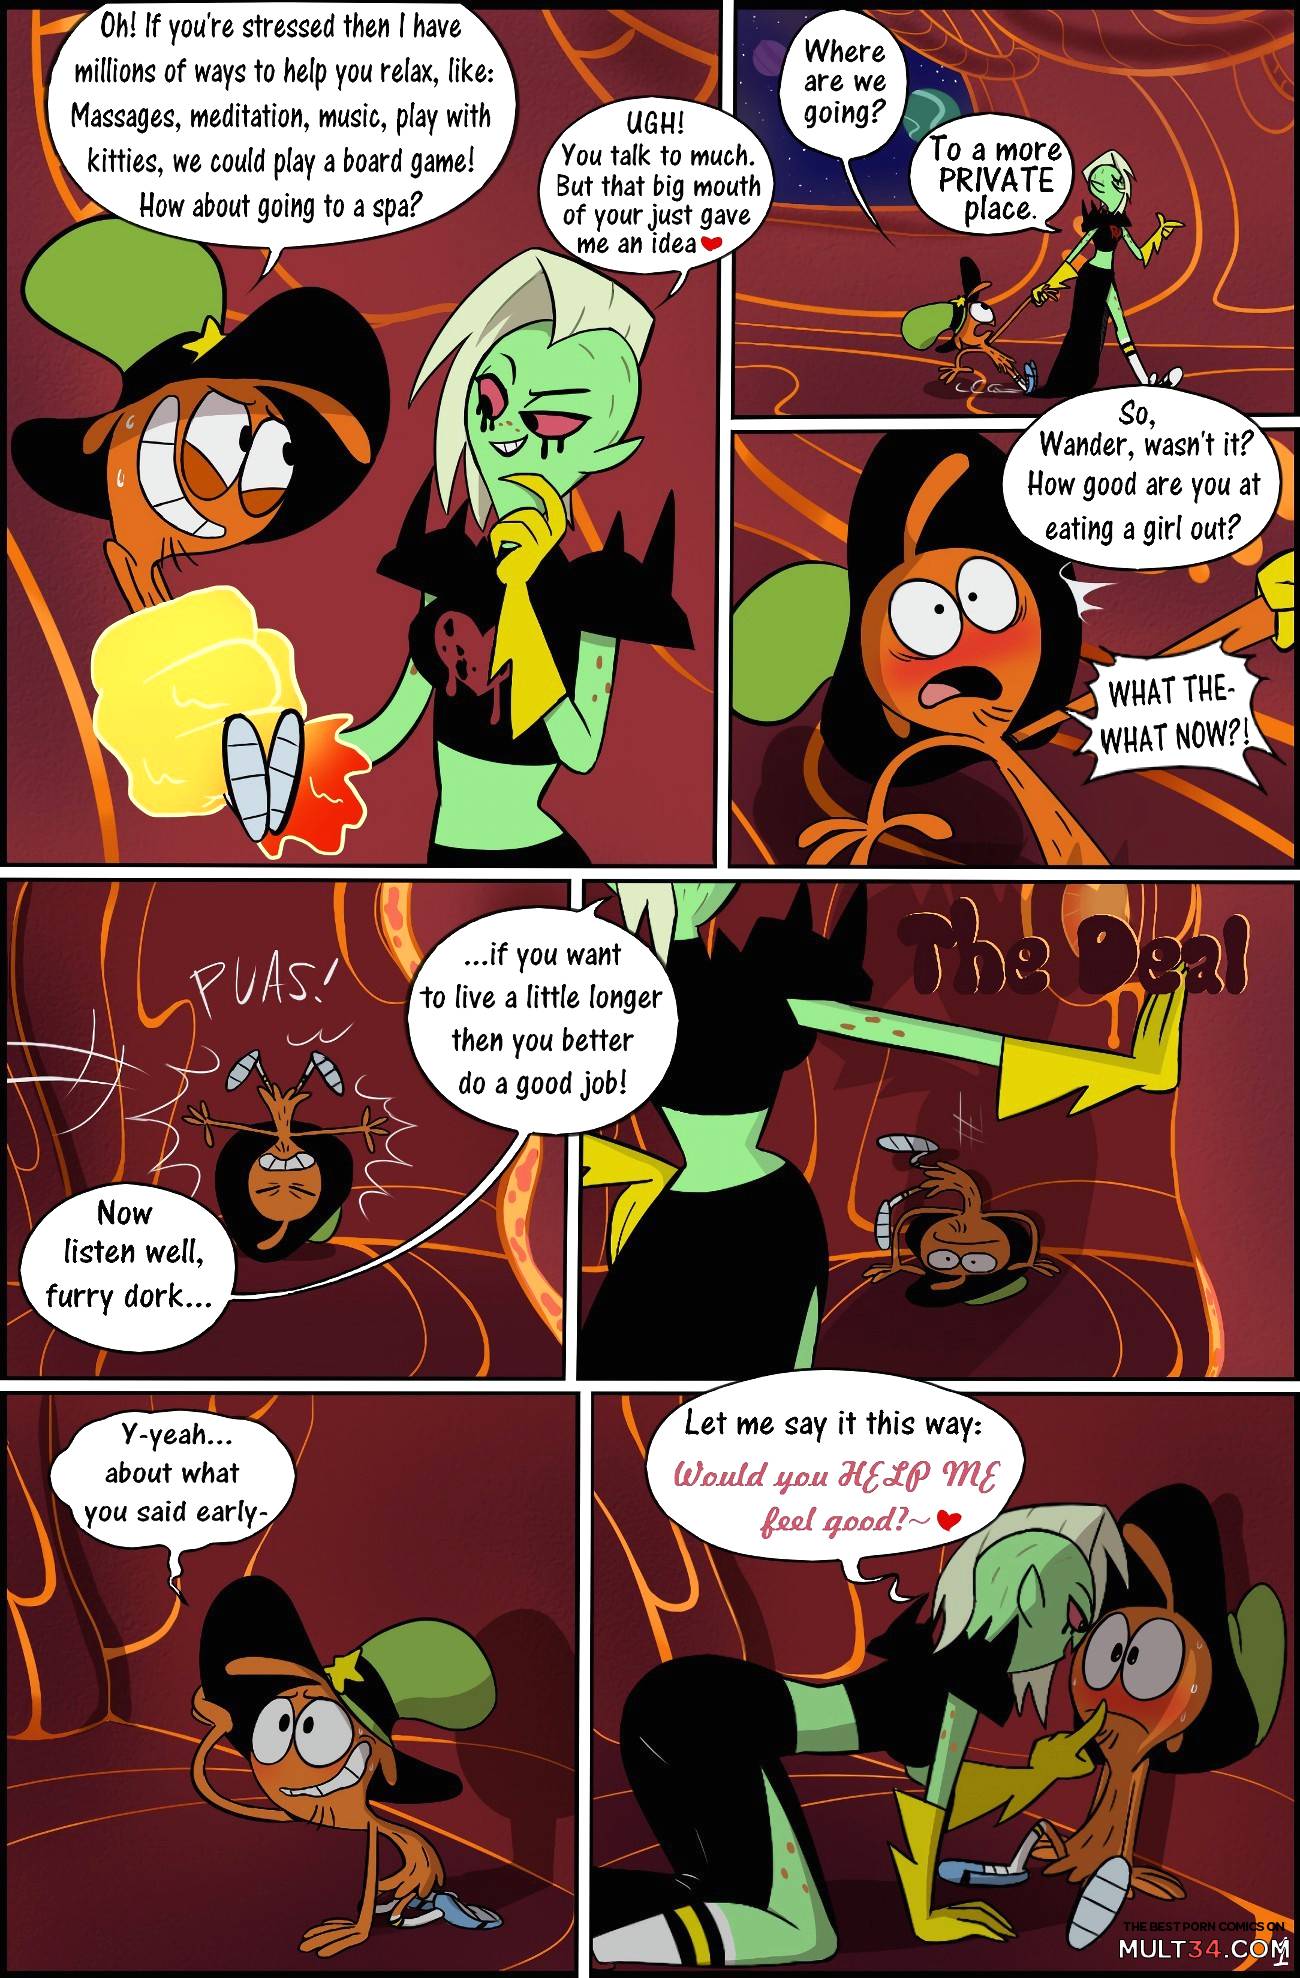 The Deal - Wander Over Yonder page 2